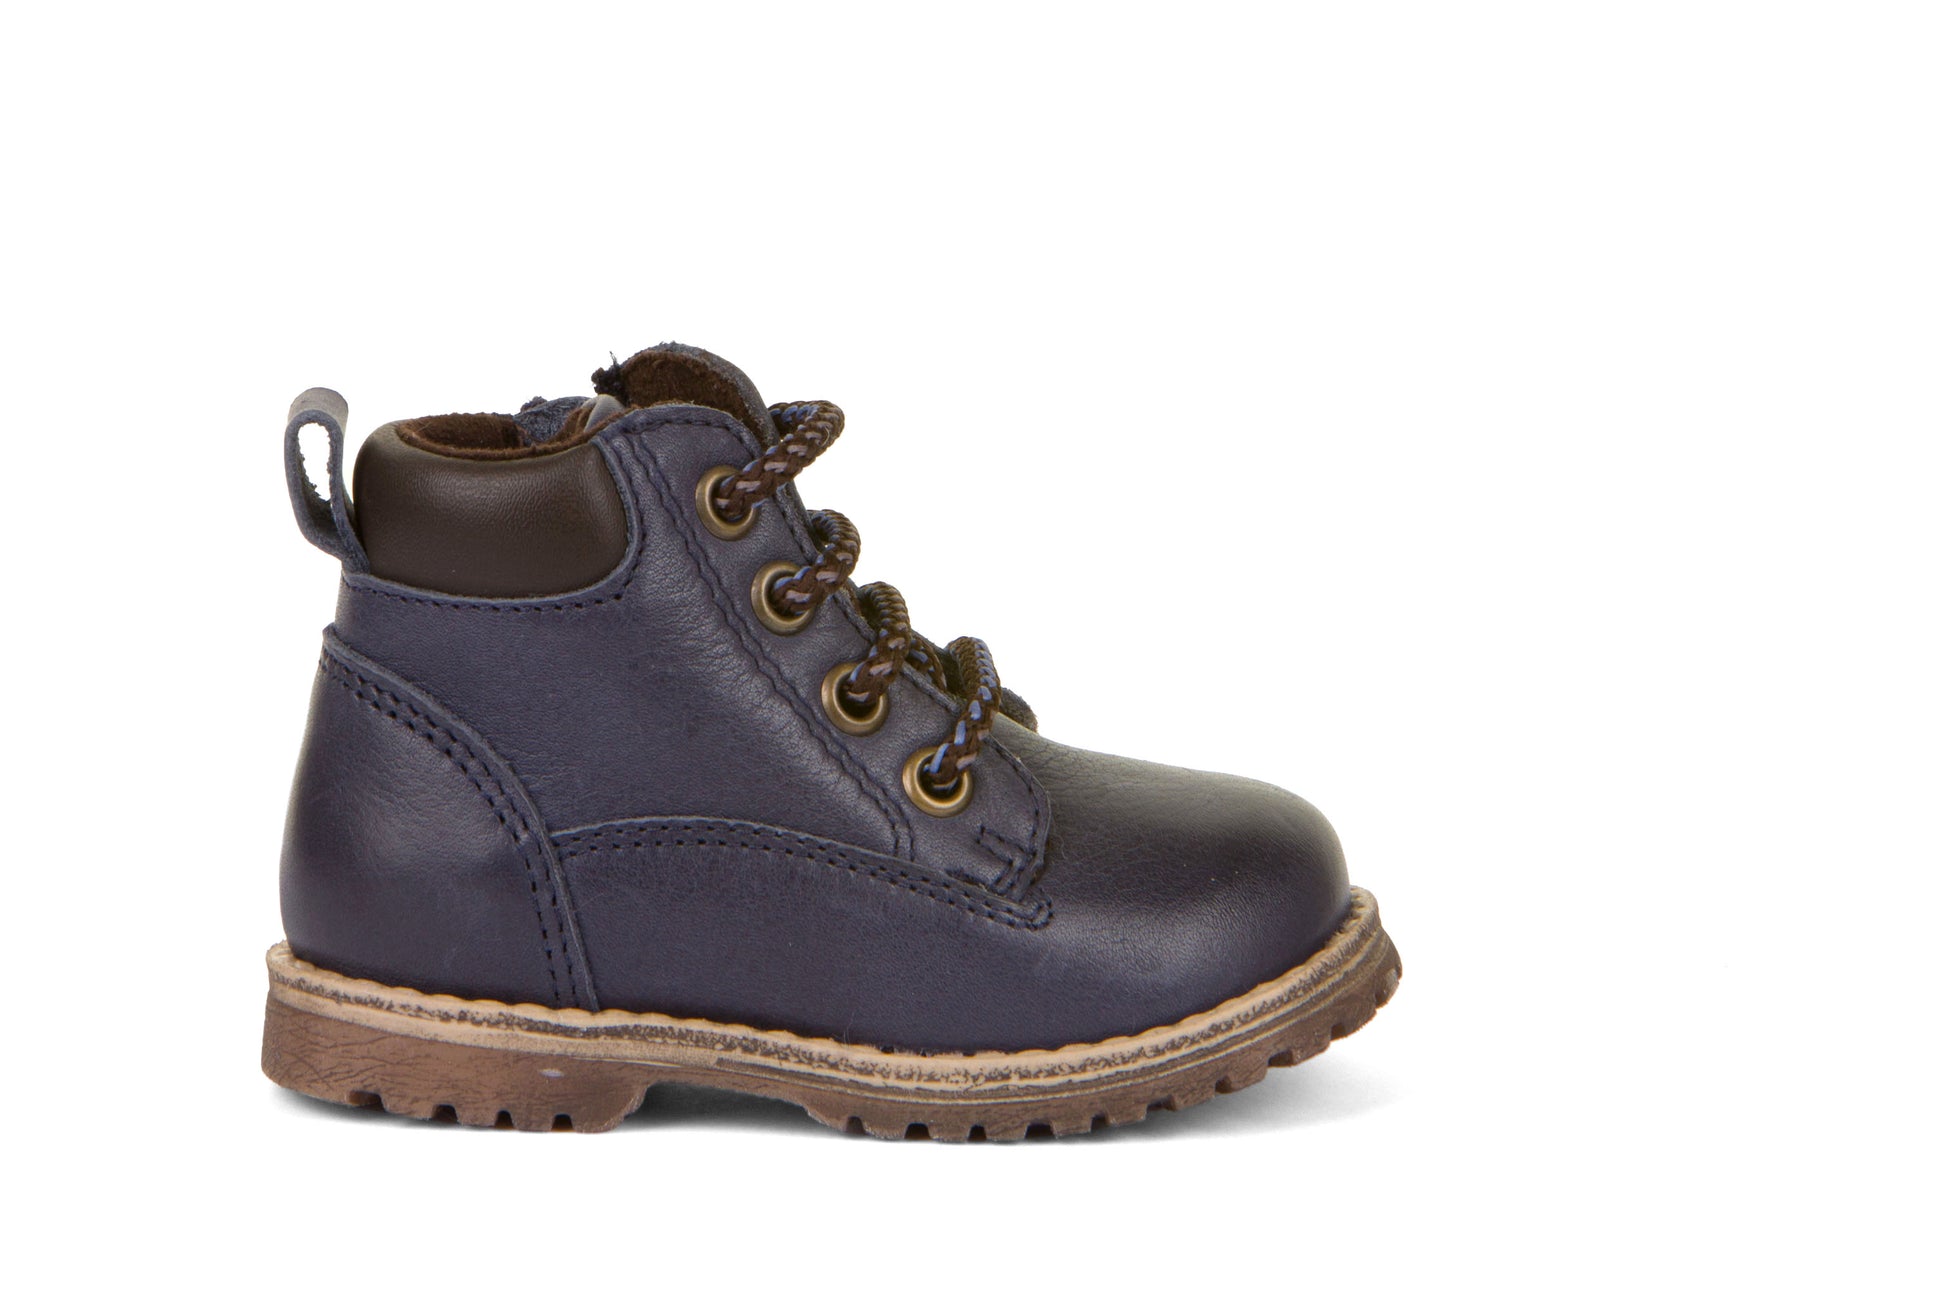 A boys boot by Froddo, style Mono  G2110108-2 in Navy with lace, zip fastening. Right Side view.